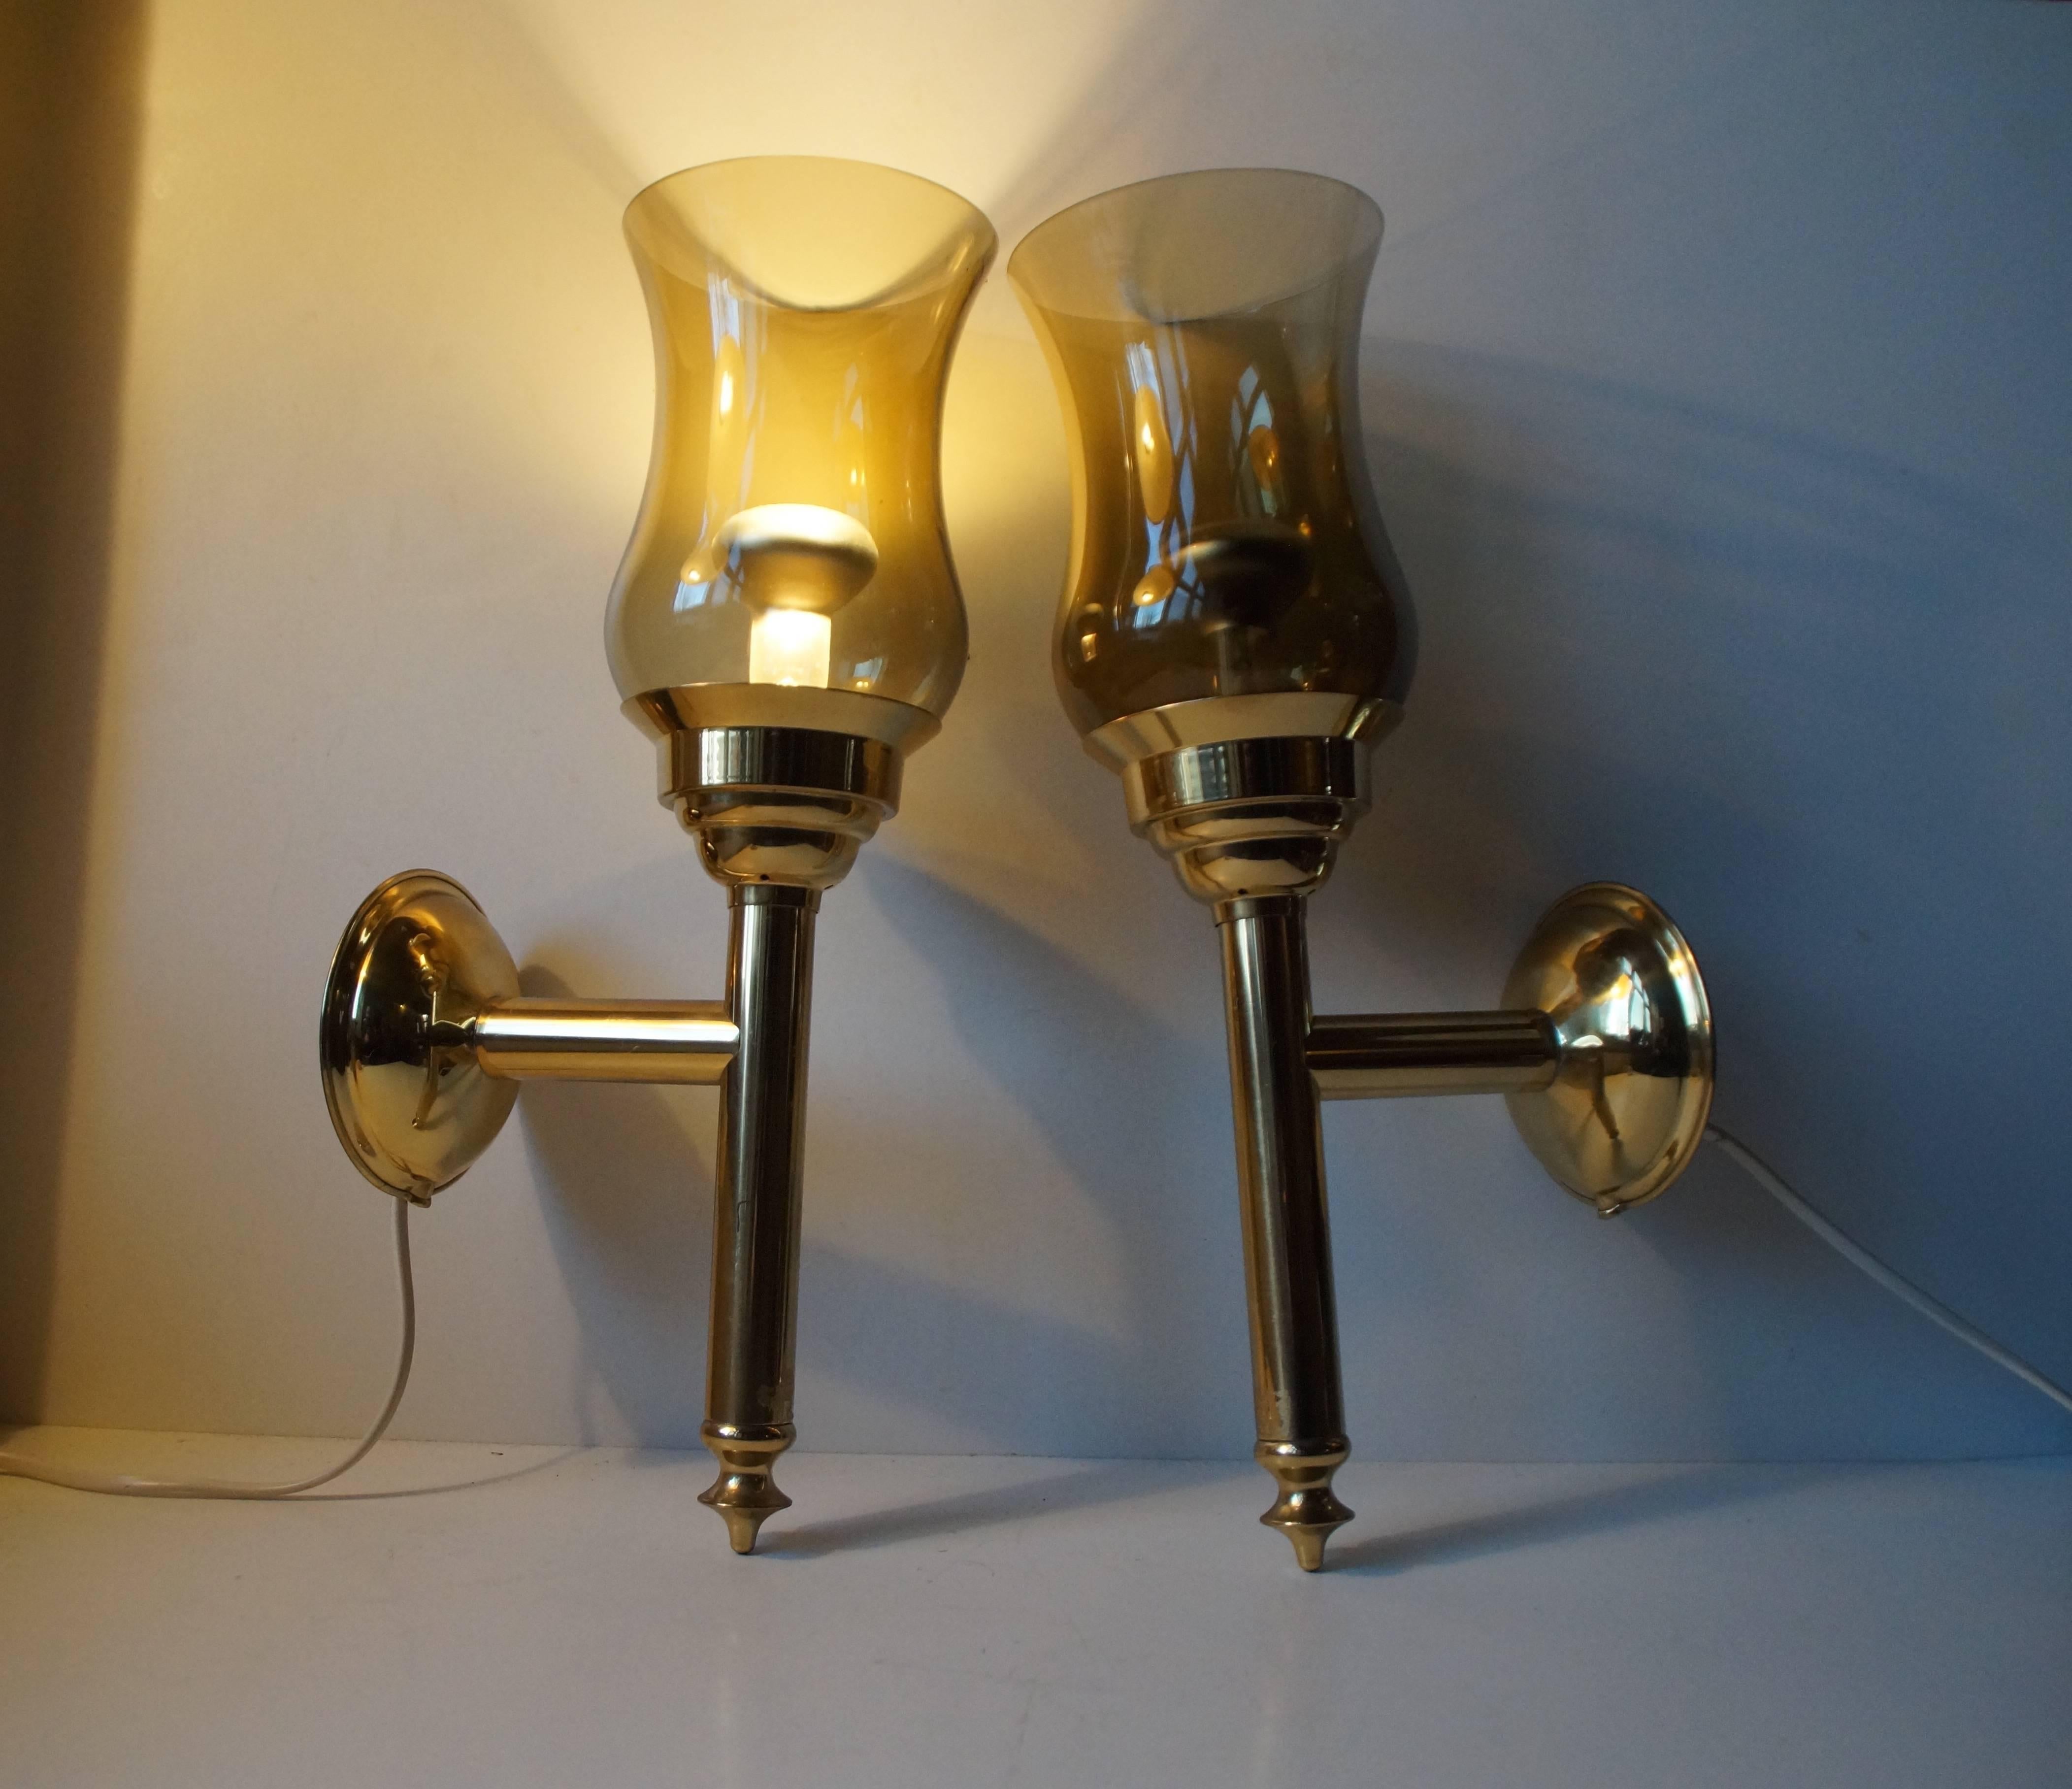 Polished Scandinavian Modern Torch Wall Sconces in Brass and Smoke Glass For Sale